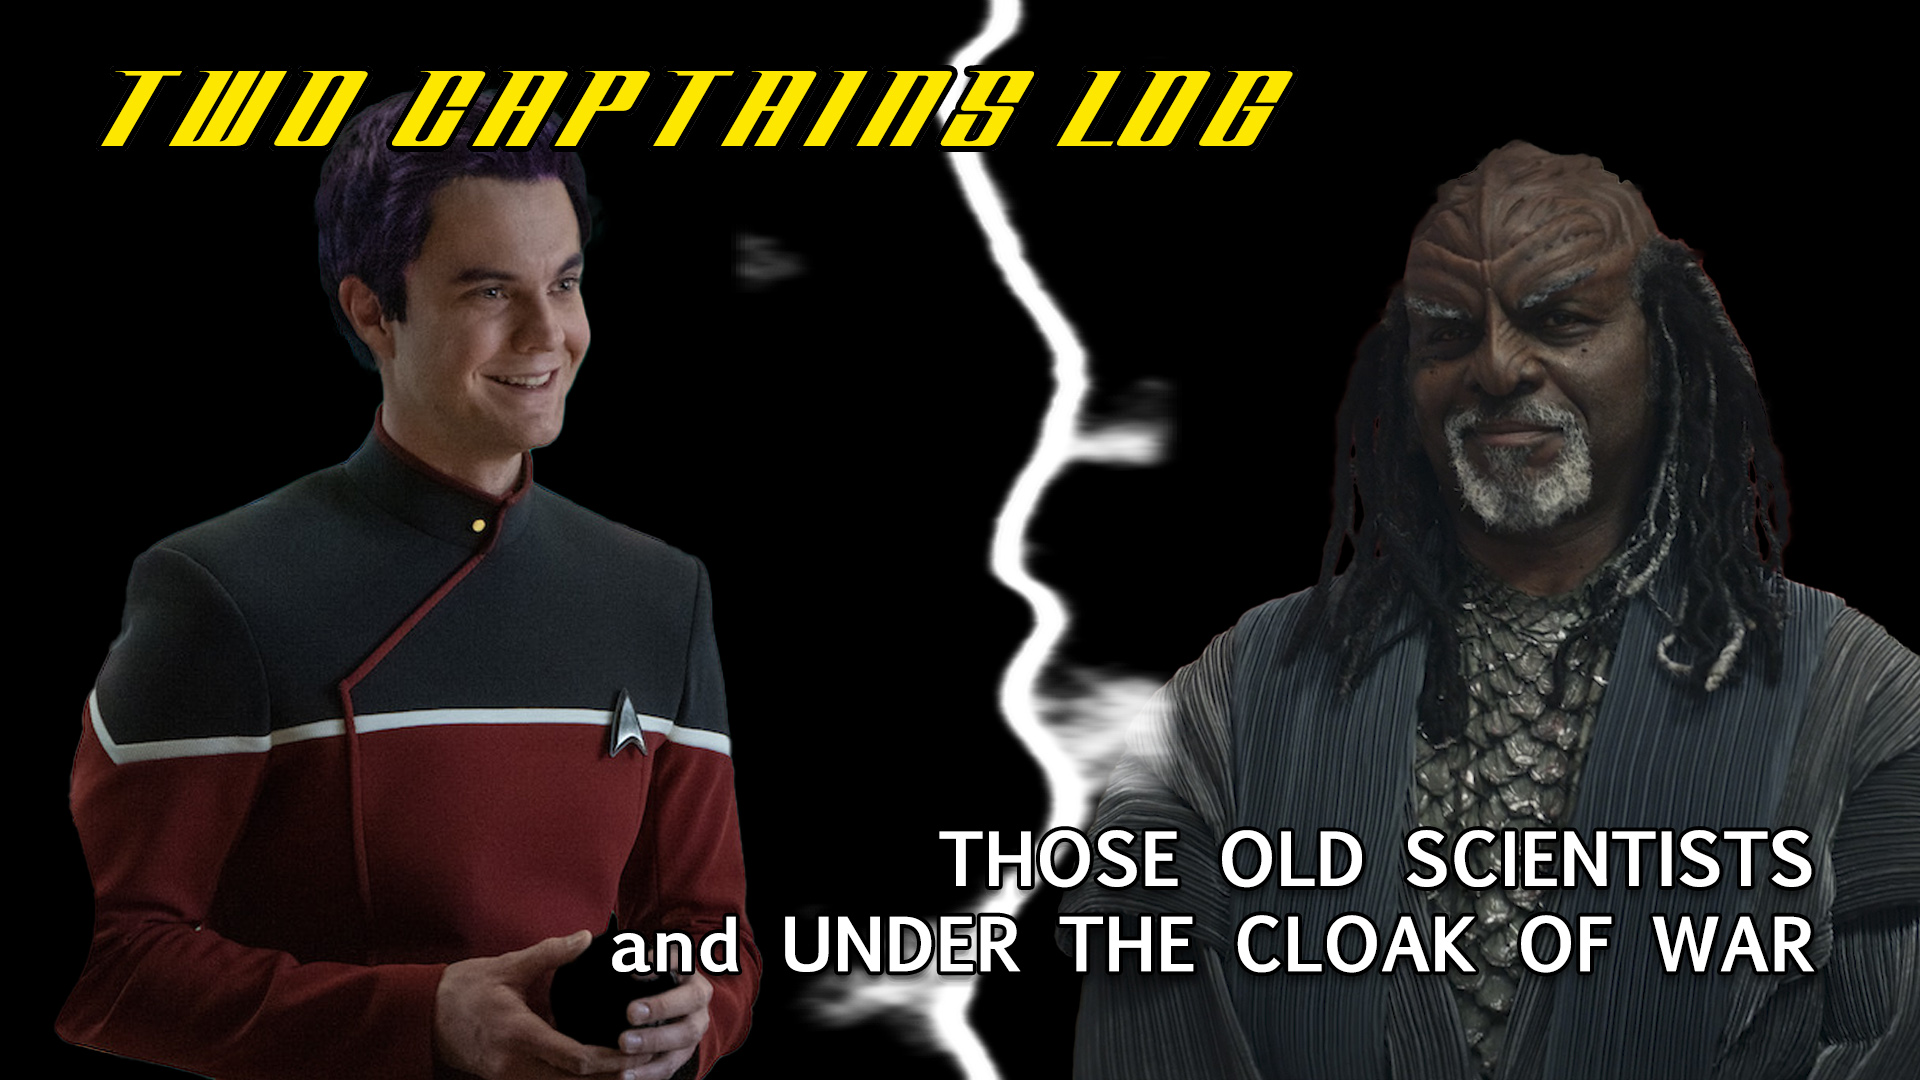 Two Captains Log: Star Trek: Strange New Worlds – “Those Old Scientists” & “Under the Cloak of War” Review